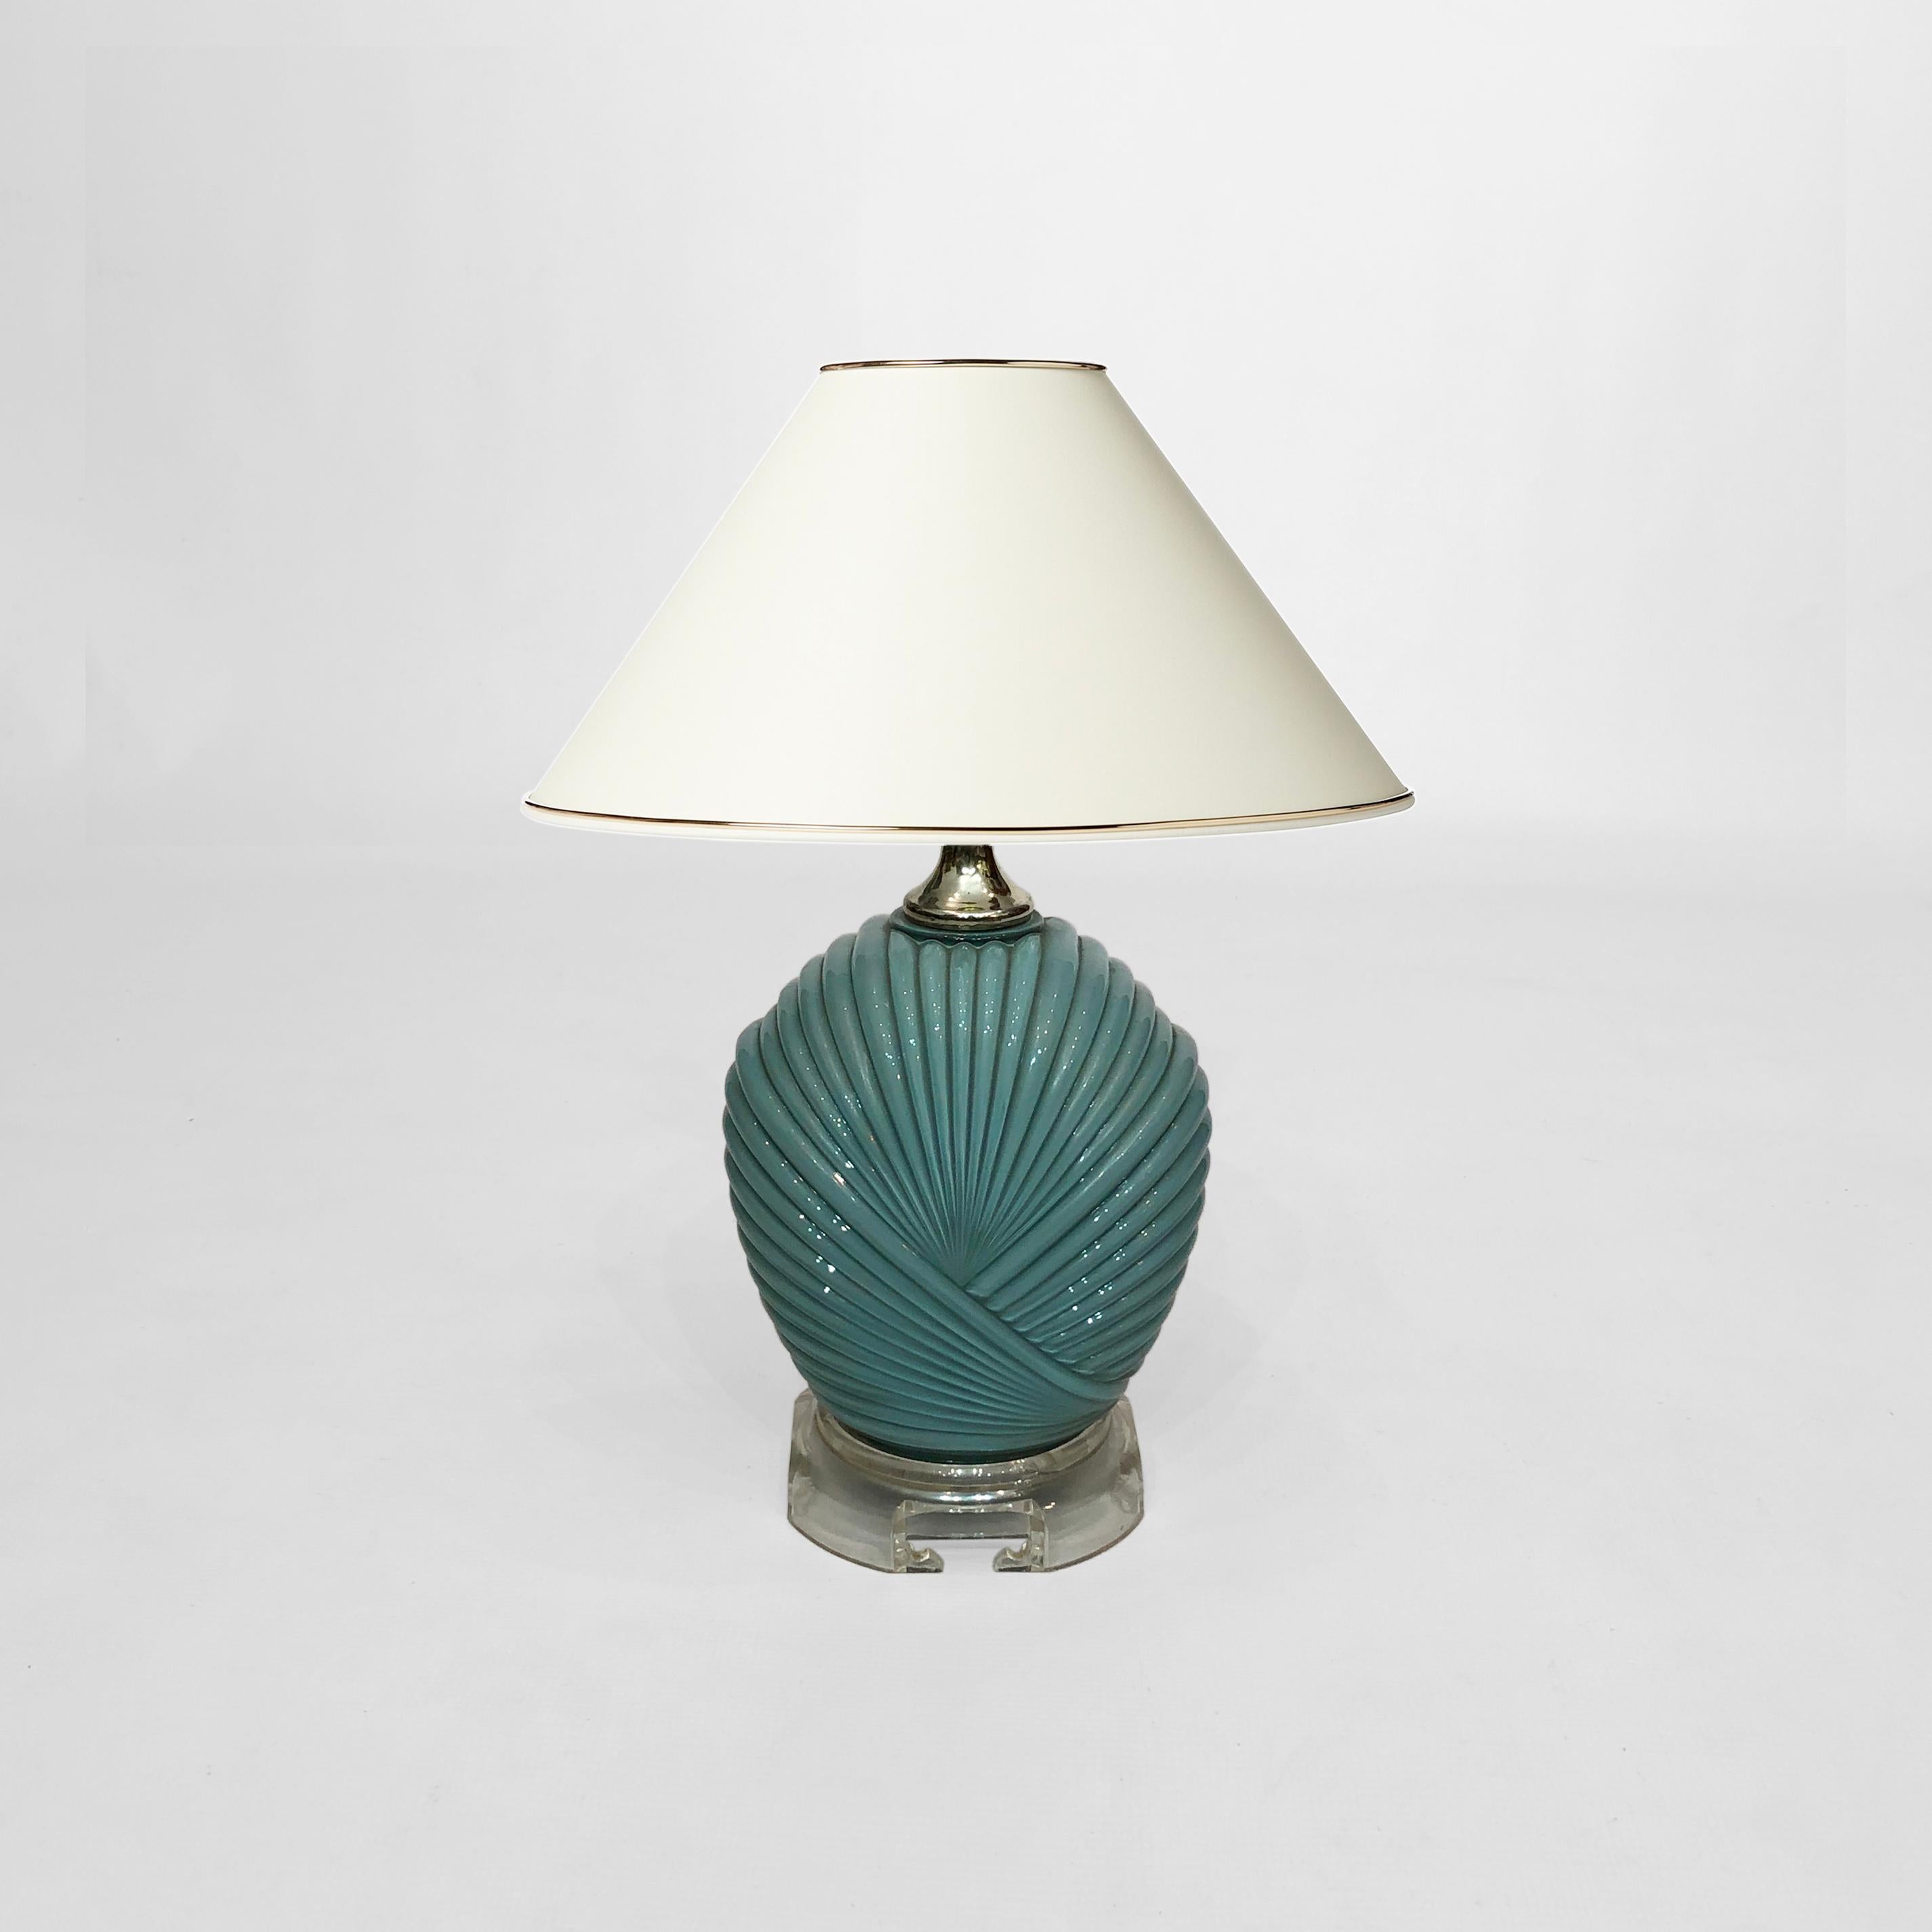 A petite dusty blue candy-style table lamp, in glass and acrylic, originating from USA in the 1970s. The body of this piece is in an Art Deco-inspired ridged glass shell pattern which is painted inside, making it look like candy. The lamp sits atop